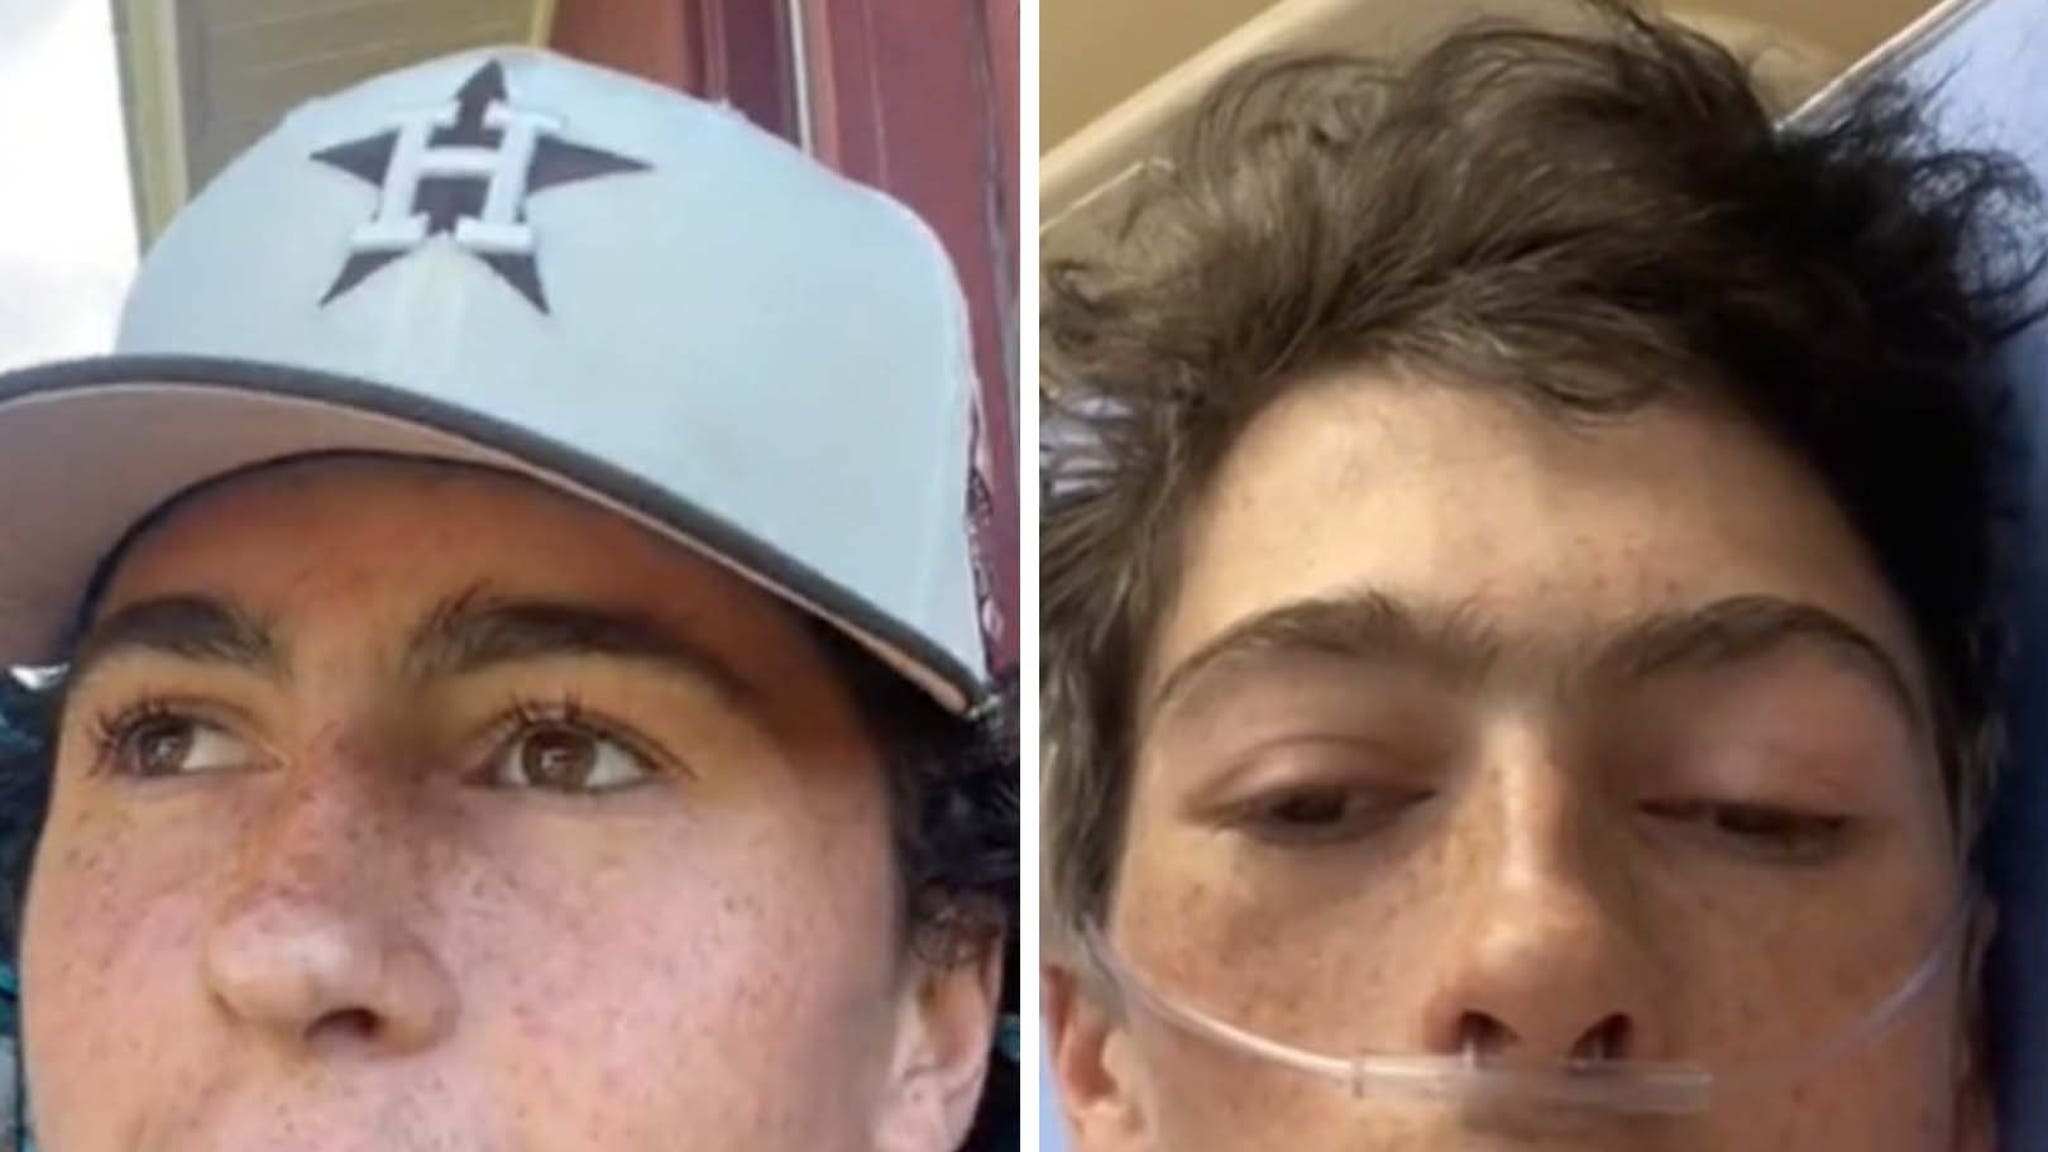 Teen With Bucket List Series on TikTok Dies of Cancer at 18: 'It's Been a Great Ride'